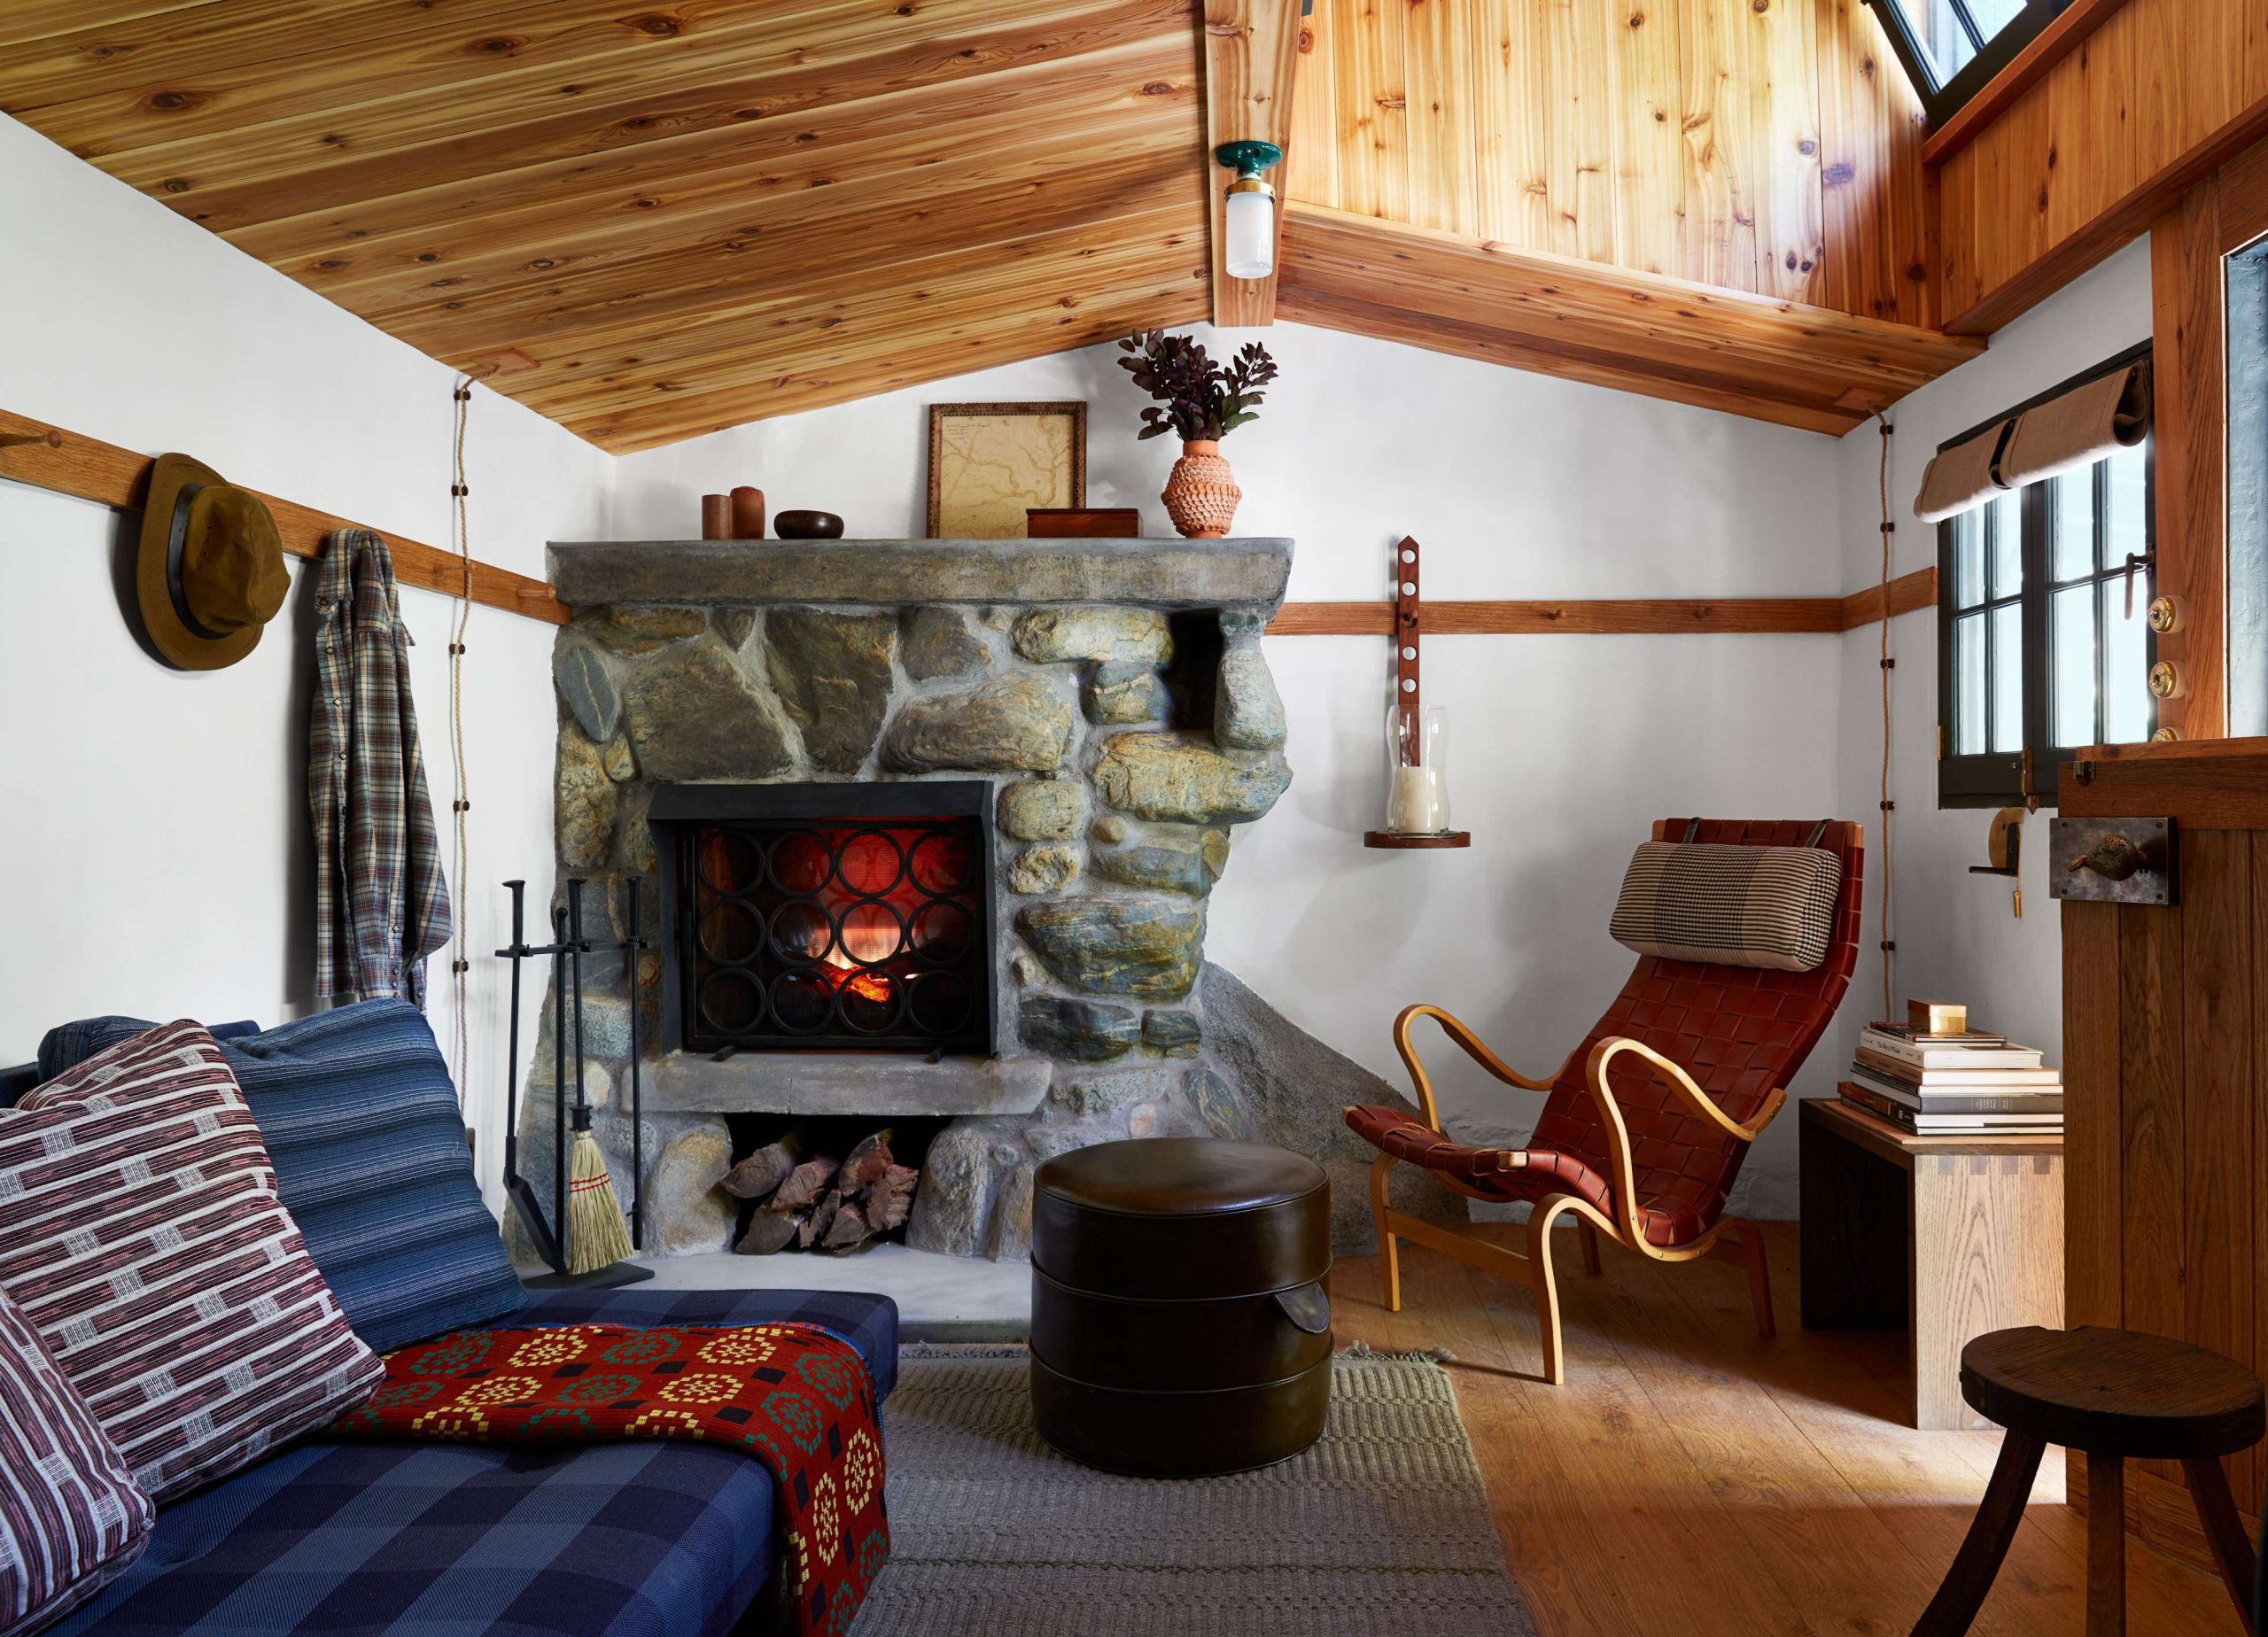 Cozy Cabin Vibes Define This Rustic Home Decor  Architectural Digest